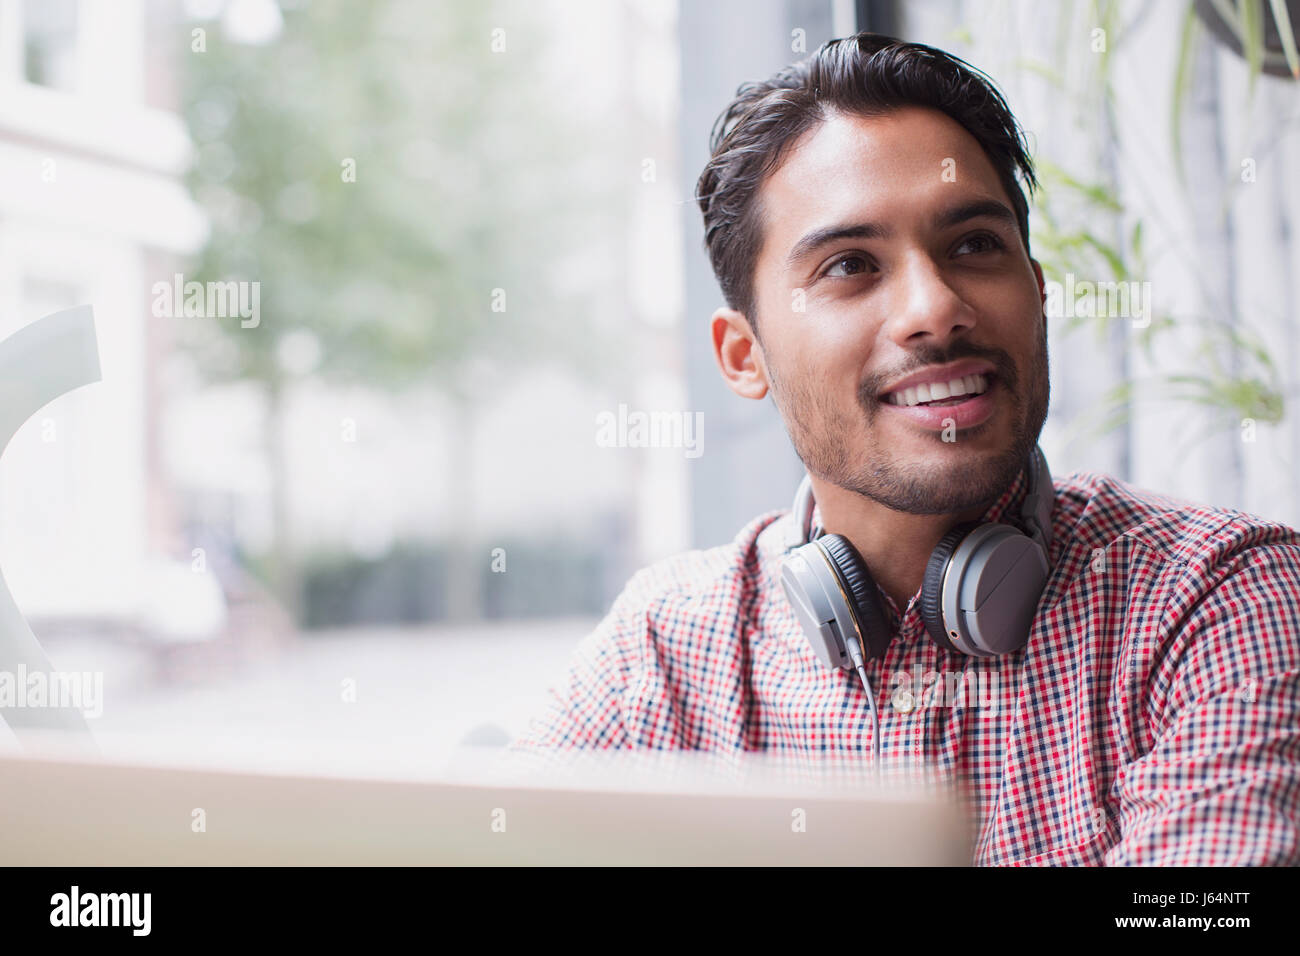 Smiling young man with headphones at laptop in cafe window Stock Photo